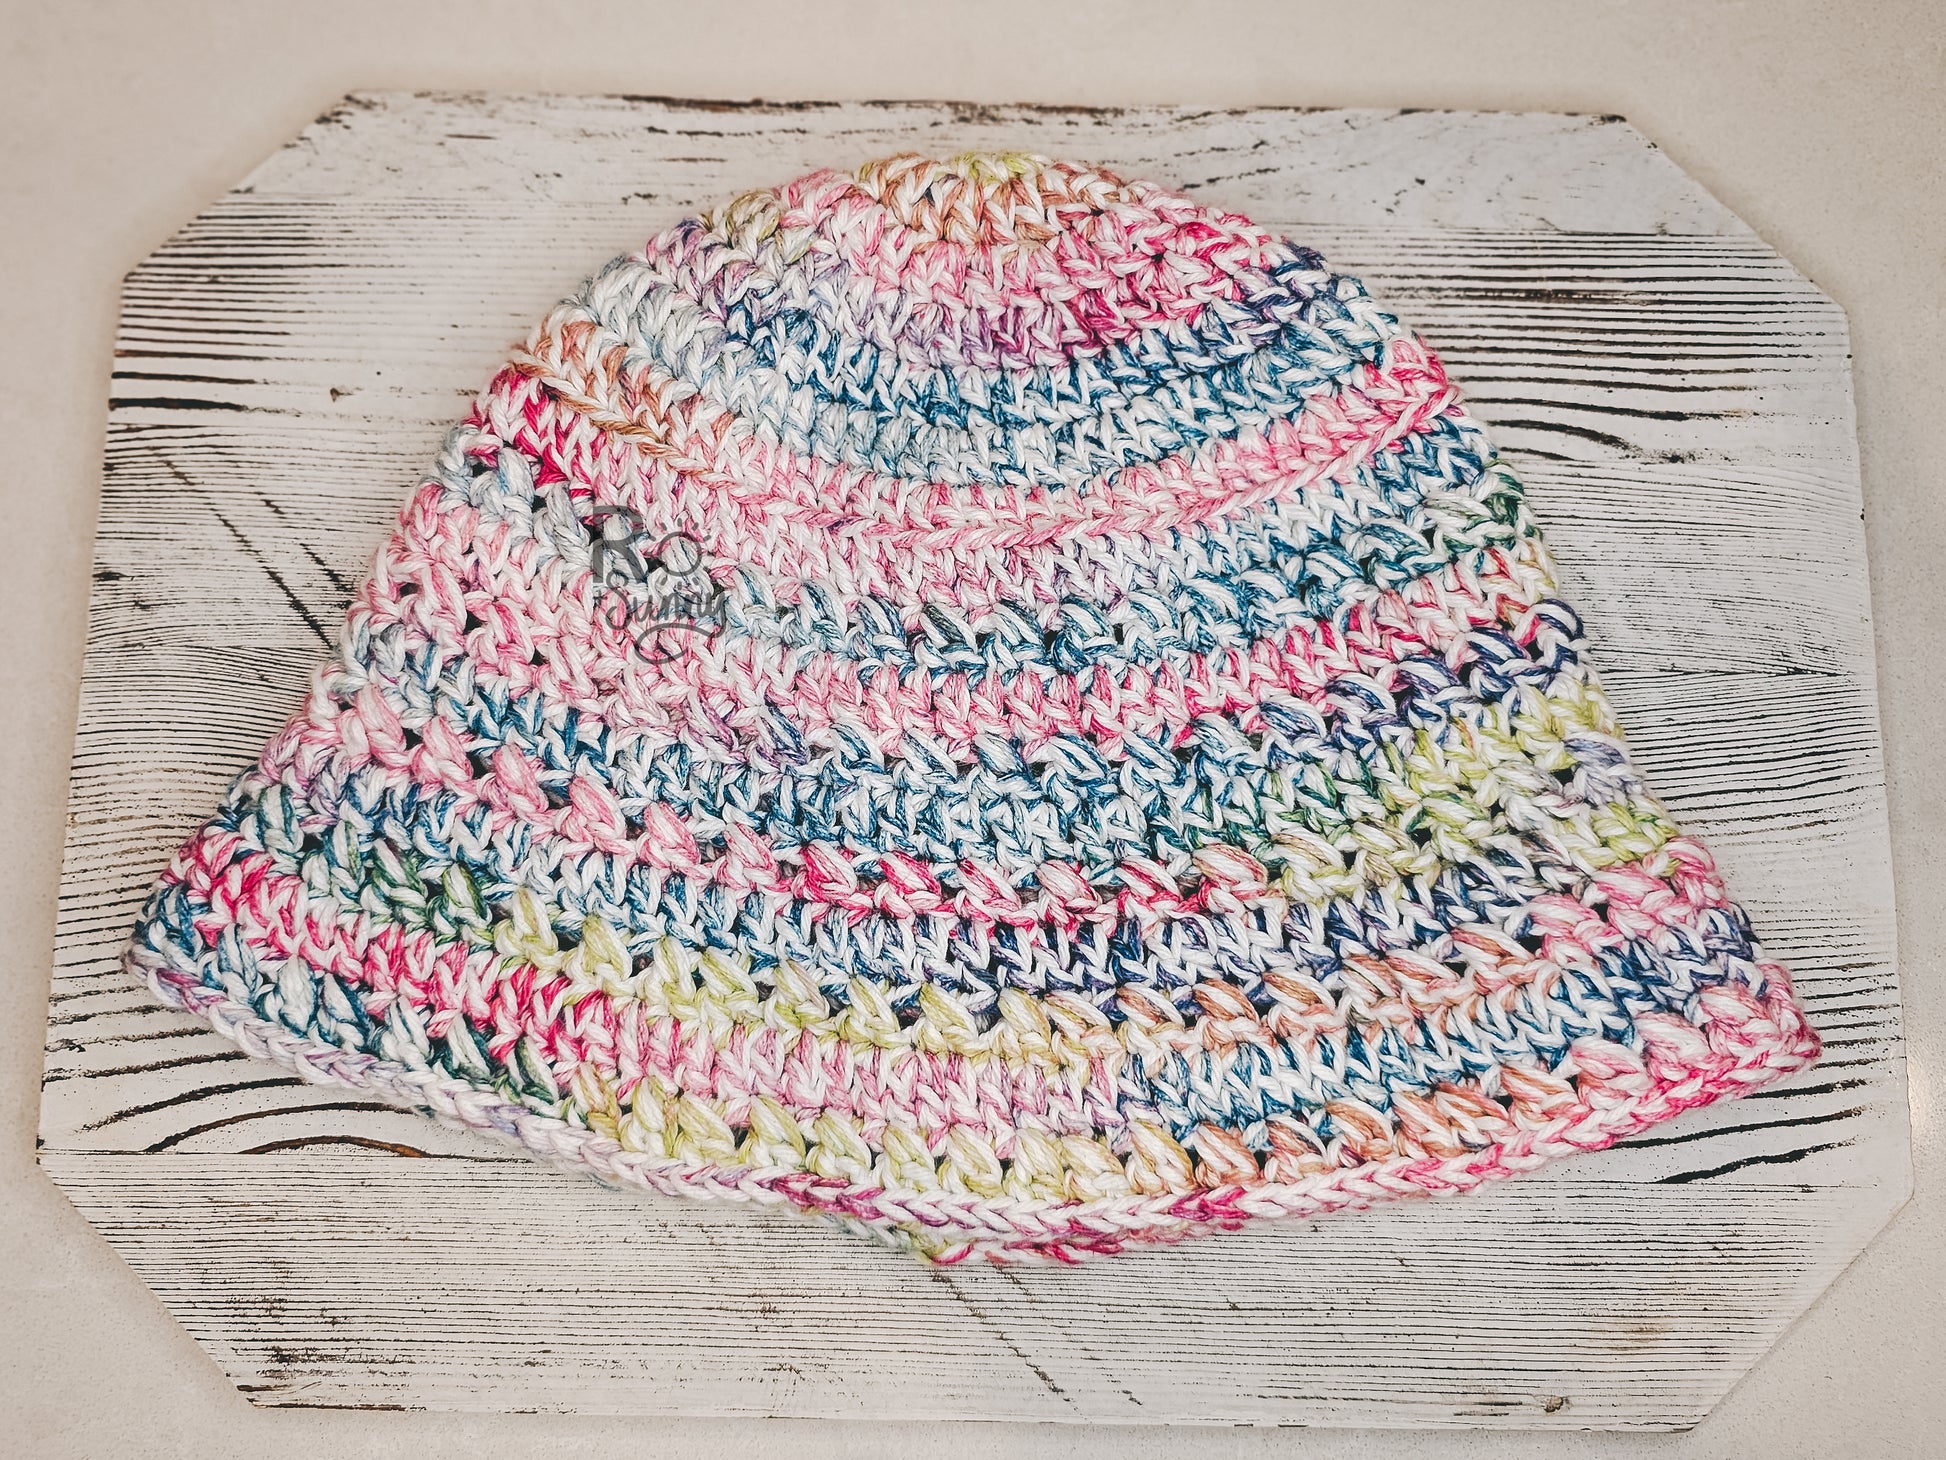 Bucket Hat in color Spring Fling - White Base with highlights of Pink, Green, Blue, Orange.